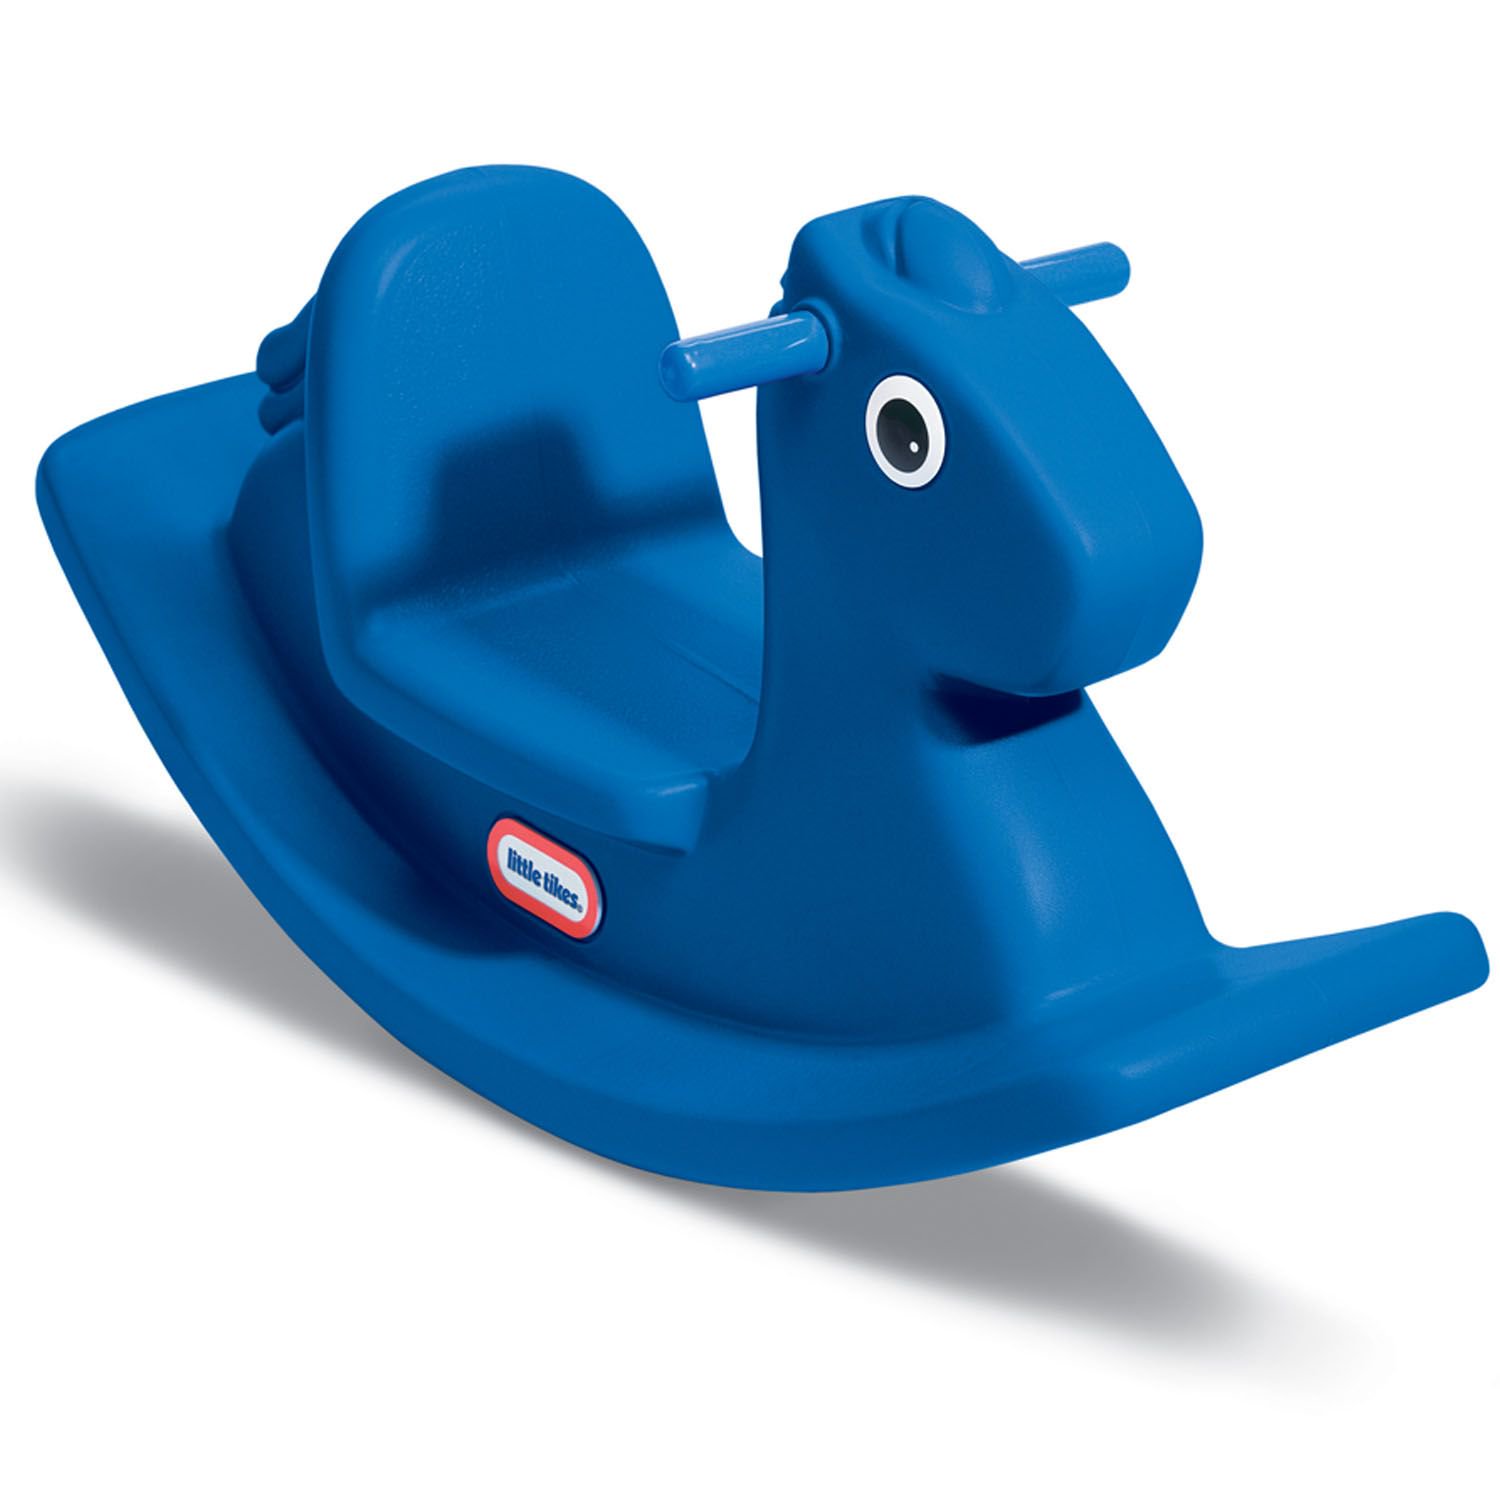 Little Tikes Outdoor & Indoor Balance Rocking Horse Toddlers, Girls Boys, Blue - image 5 of 5